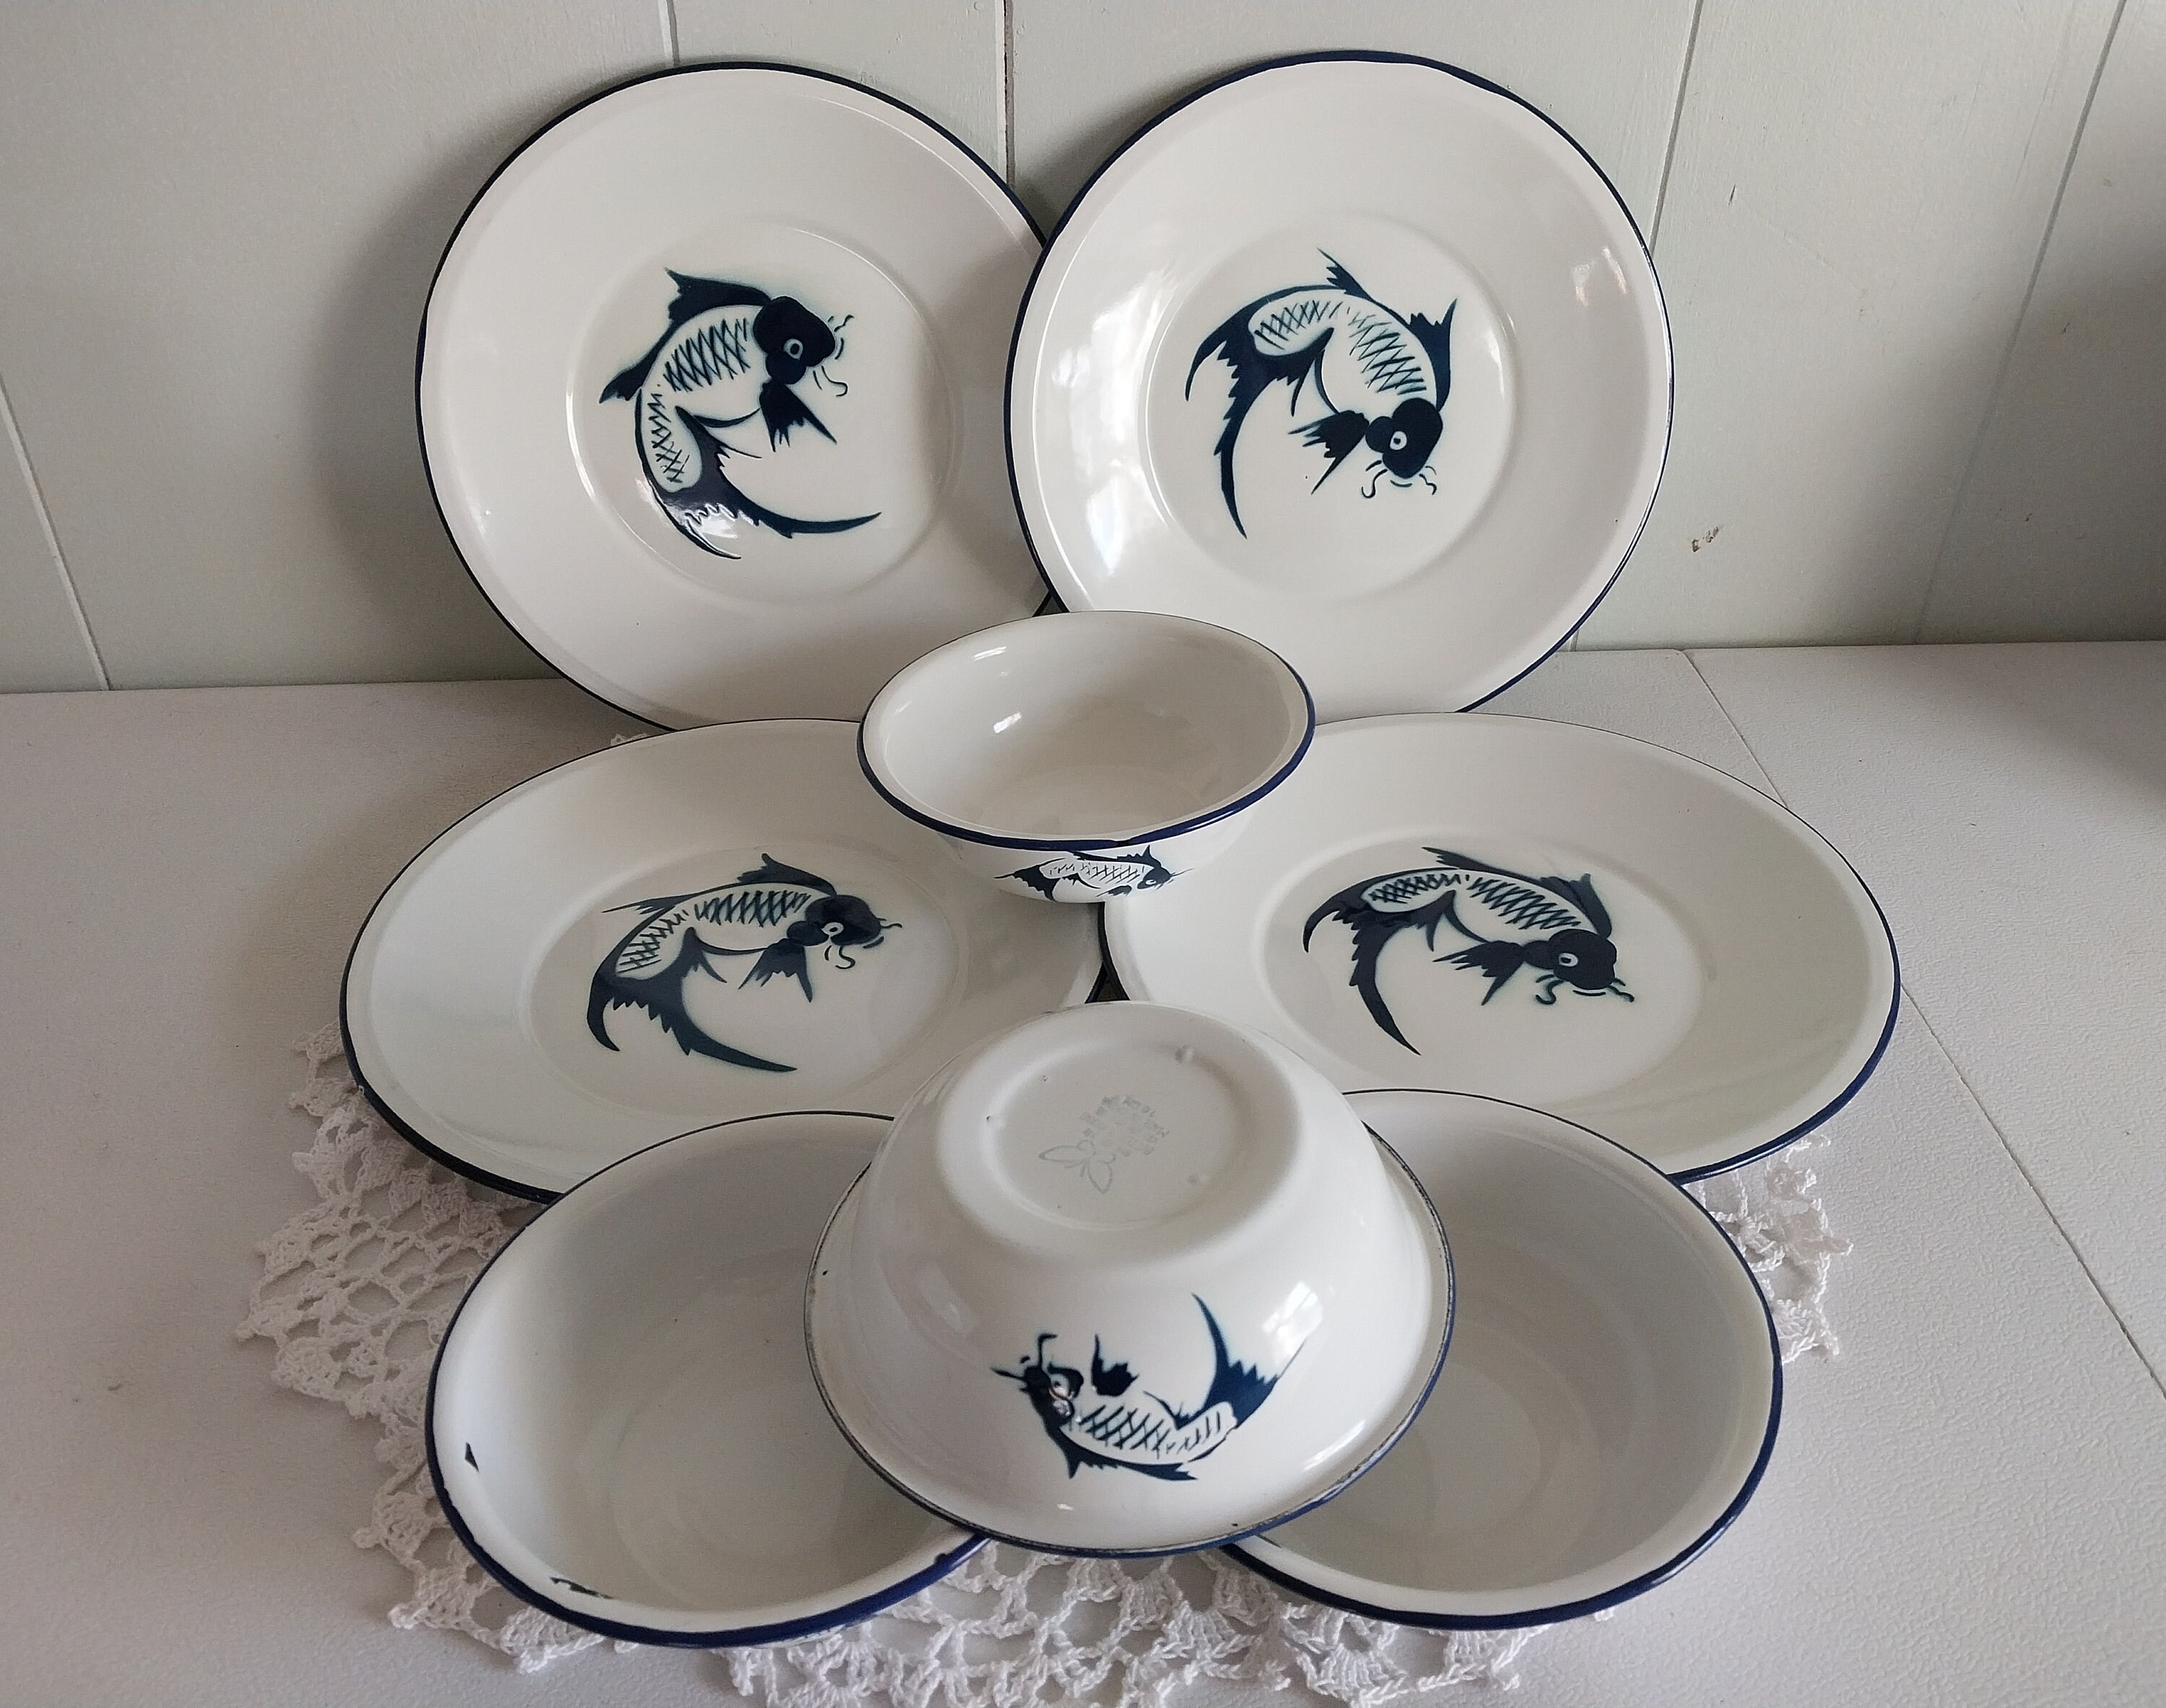 Vintage Set of 4 Koi Fish Enamelware Metal Plates and Rice Bowls, Butterfly  Brand, White and Blue, Asian Motif - 18269